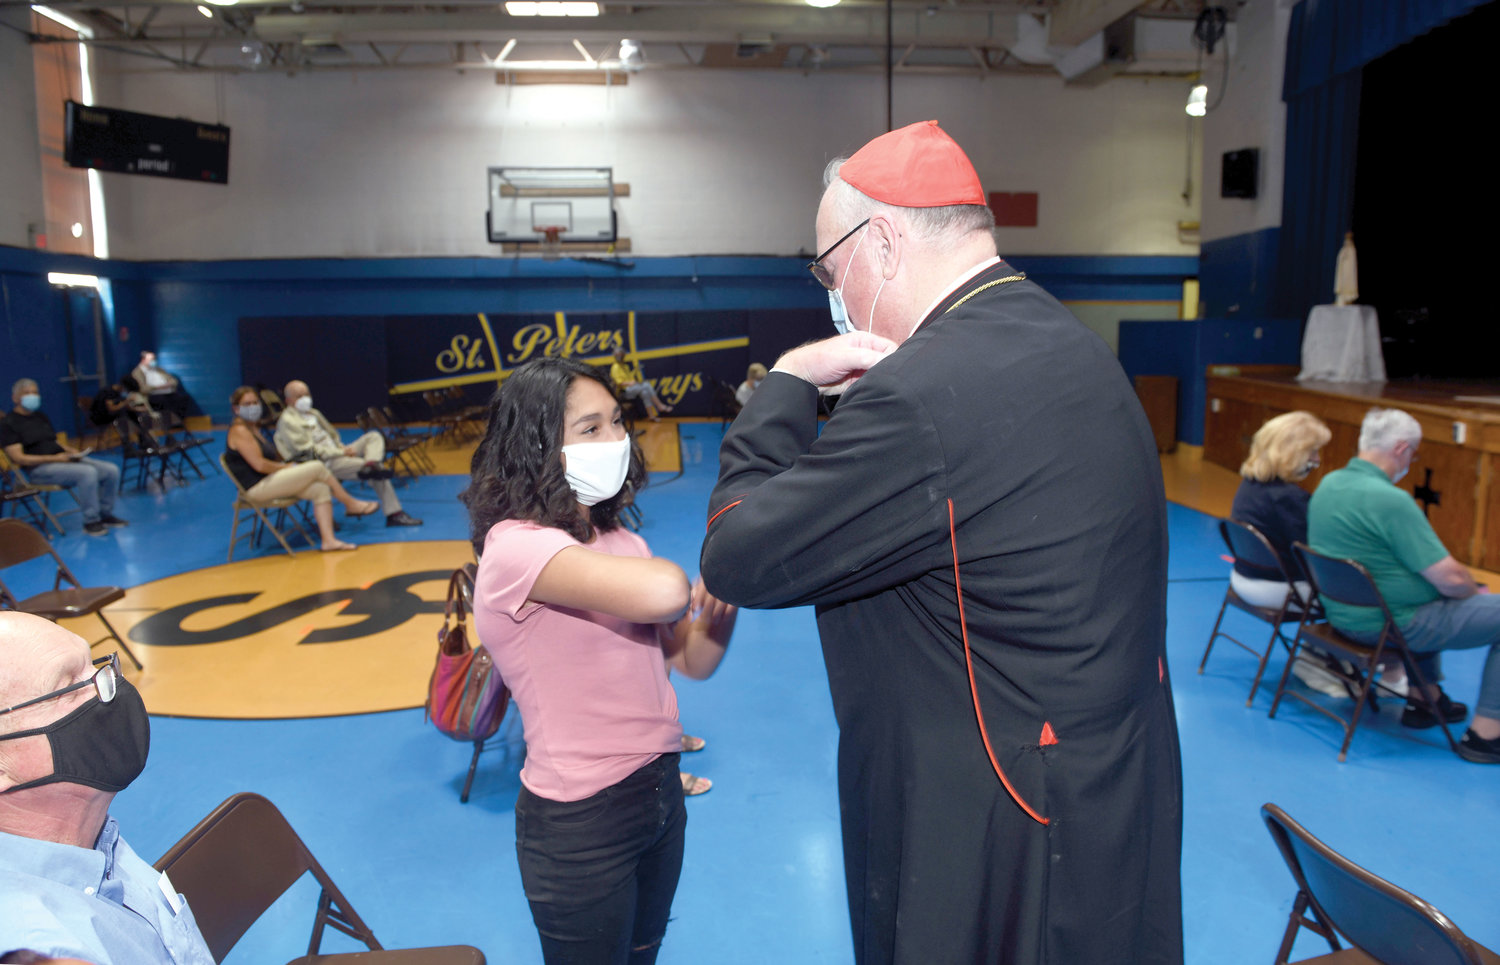 Cardinal Dolan greets 14-year-old Isabella Munoz after celebrating Mass in St. Peter’s School gymnasium in Haverstraw June 27. Isabella underwent a heart transplant two years ago, and the cardinal regularly visited her and prayed with the family in the hospital.